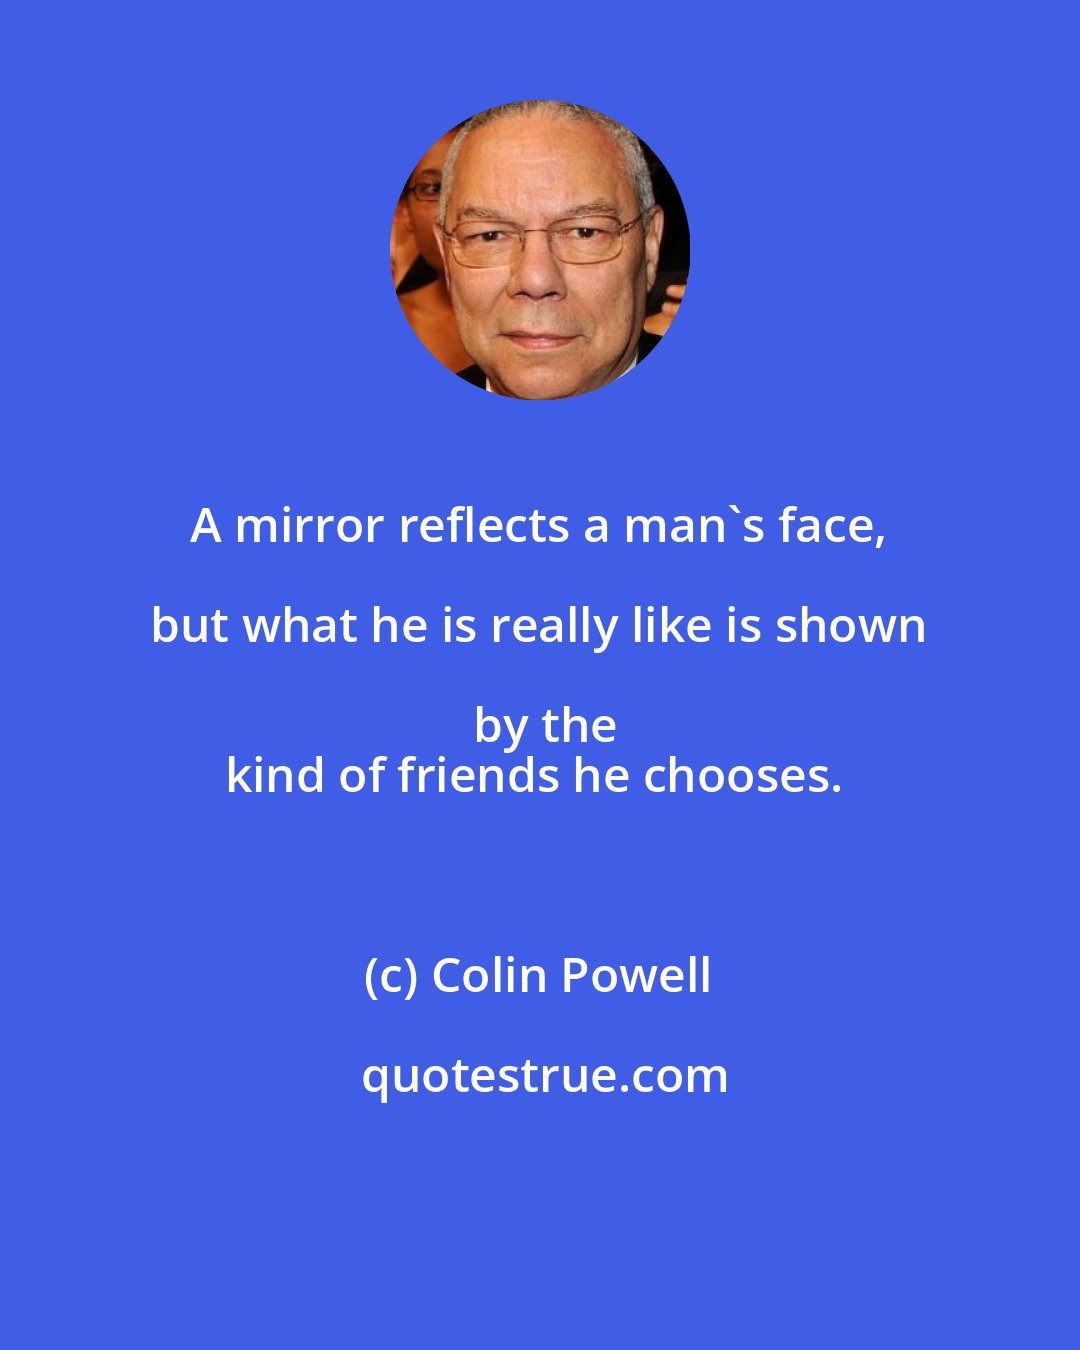 Colin Powell: A mirror reflects a man's face, but what he is really like is shown by the
kind of friends he chooses.